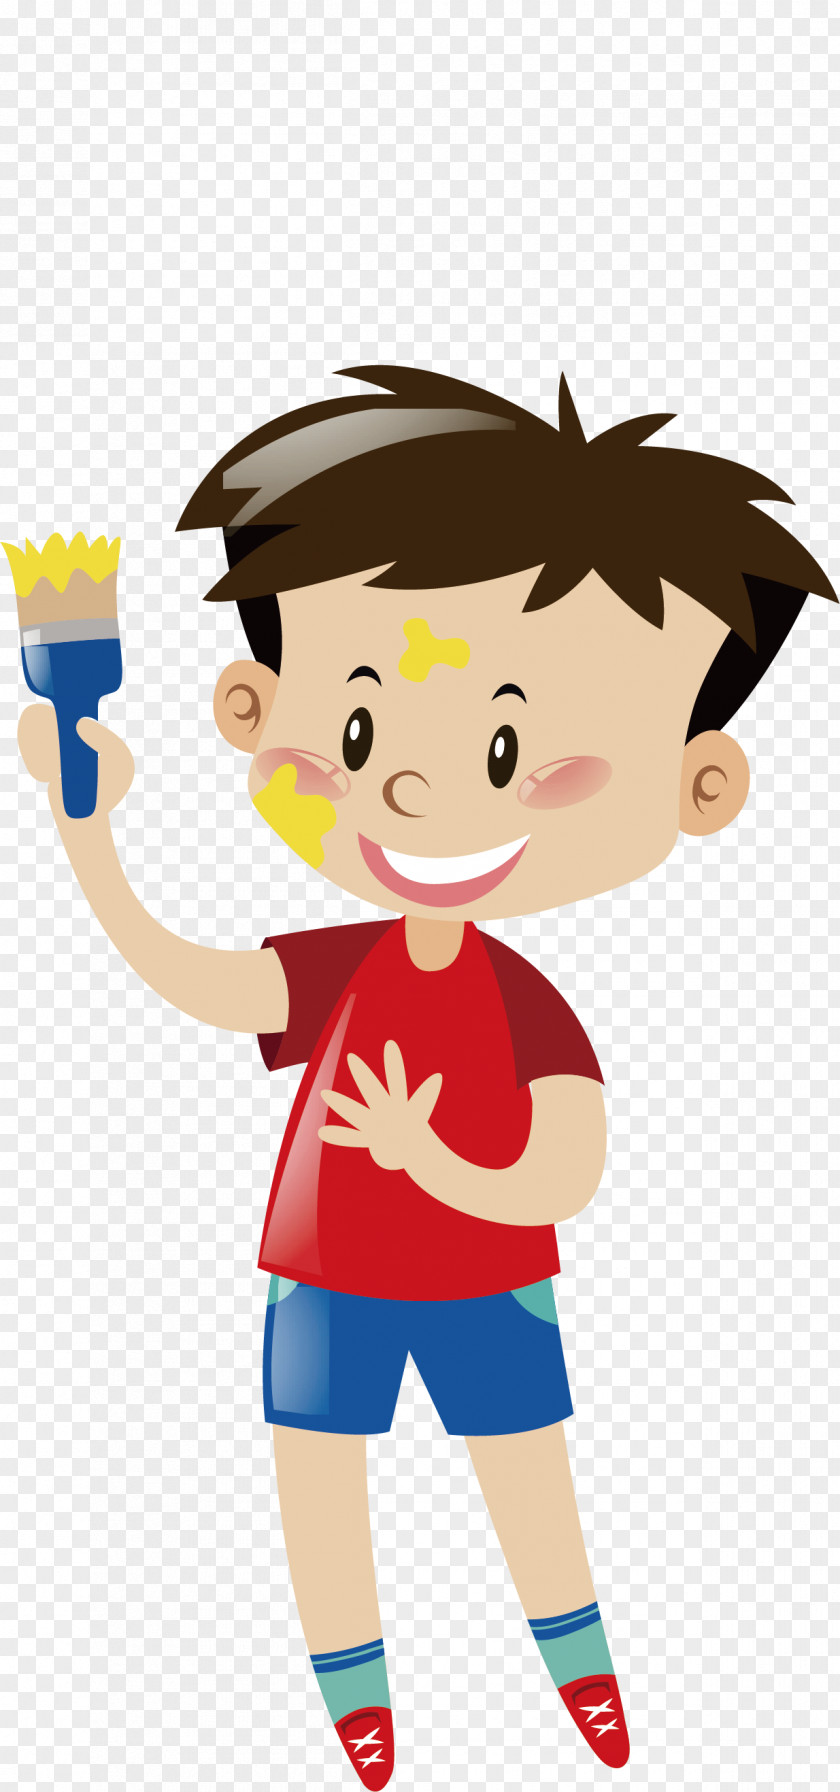 Decoration Boy Painting Wall Illustration PNG